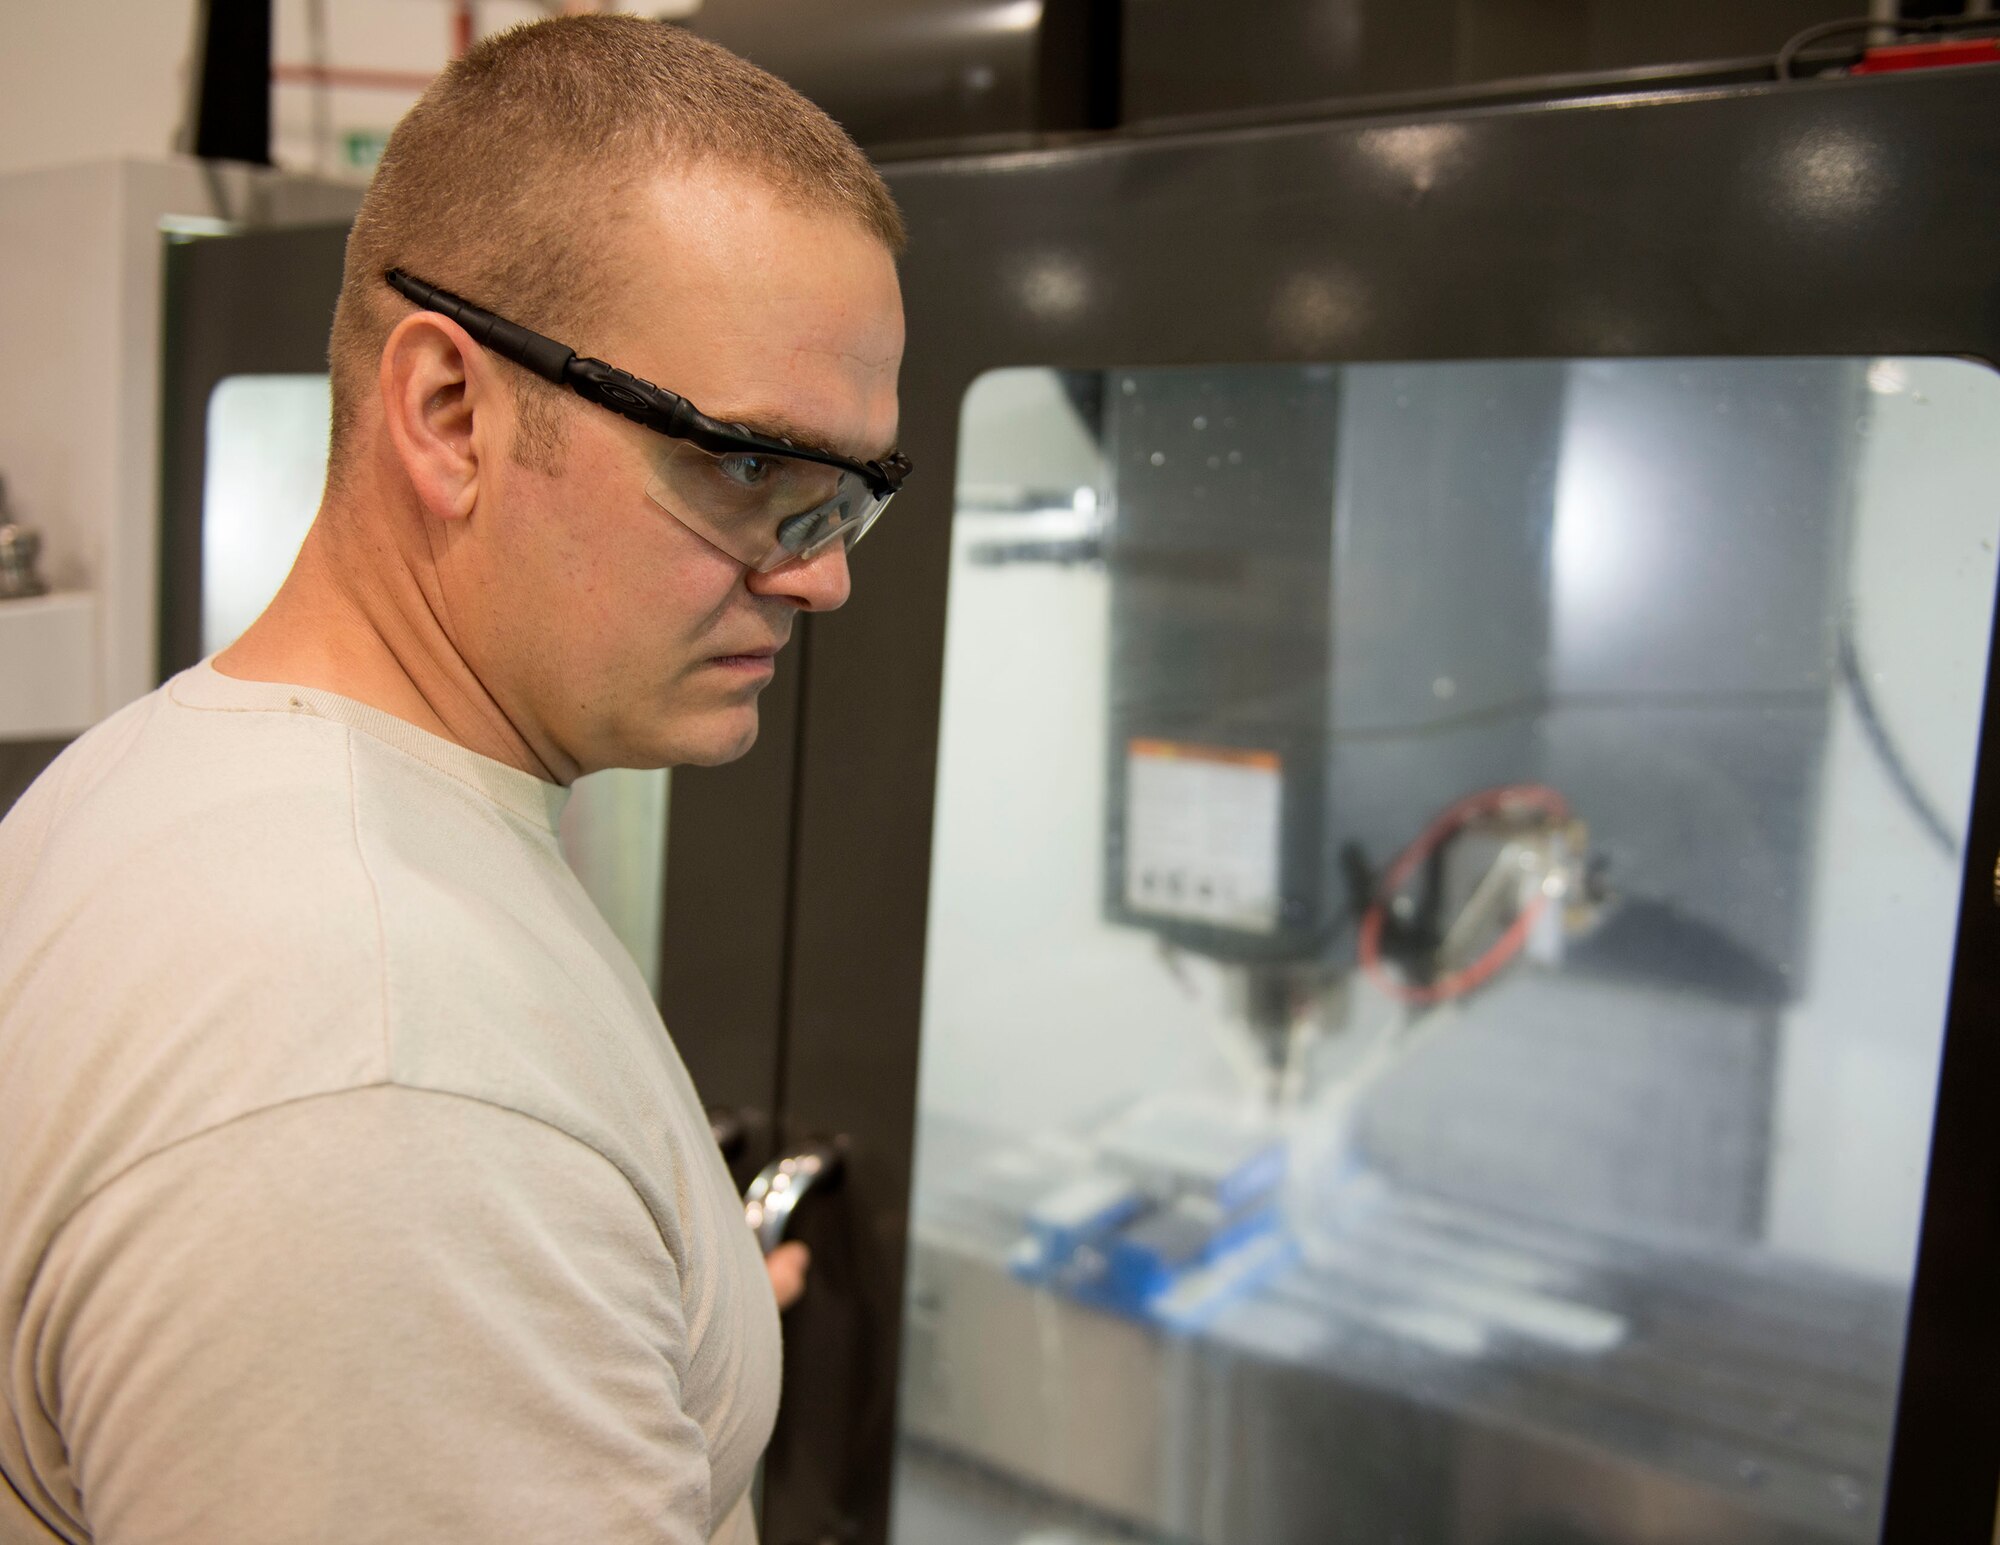 U.S. Air Force Staff Andrew Walker, a fabrication specialist with the 379th Expeditionary Maintenance Squadron uses a computer numerical control machine at Al Udeid Air Base, Qatar, June 5, 2017. The CNC allows Walker and other machinists to increase the speed of the manufacturing and reduce the wait time for new aircraft parts. (U.S. Air Force photo by Tech. Sgt. Amy M. Lovgren)